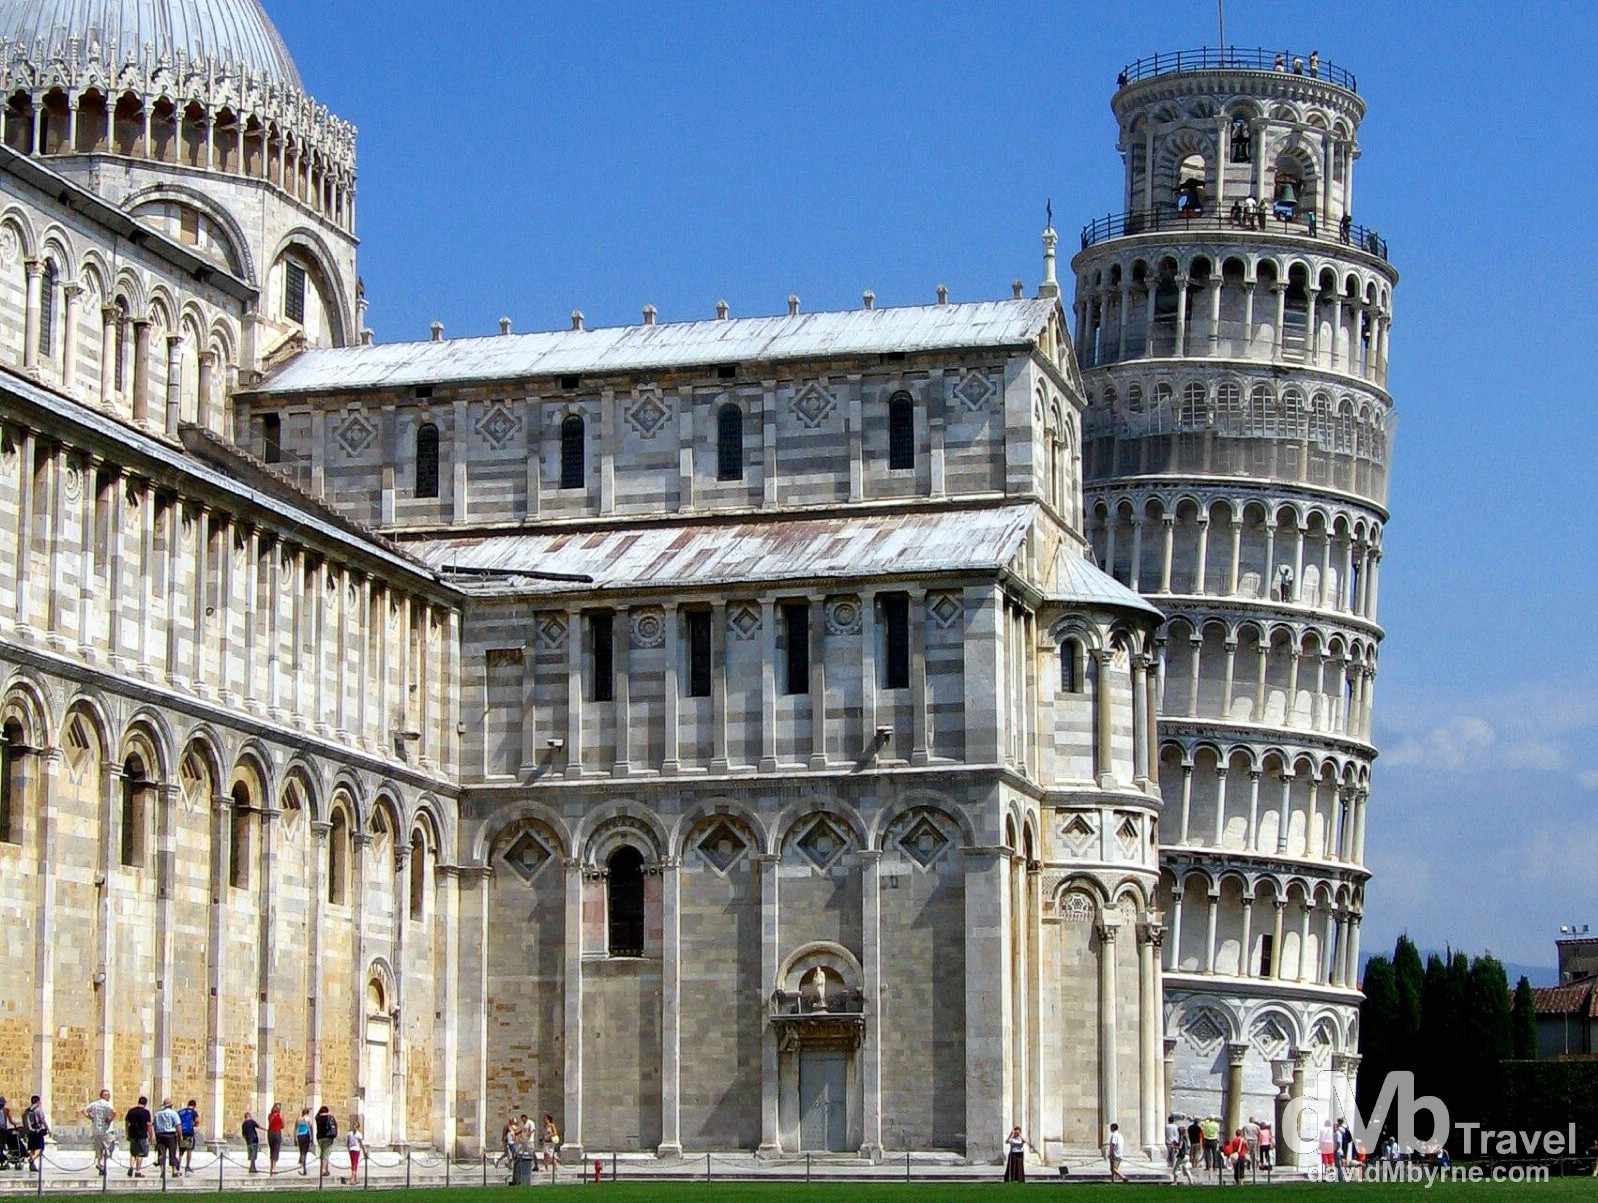 A section of the Cathedral & the leaning tower in the Campo dei Miracoli (Field of Miracles) in Pisa, Tuscany, Italy. August 31st 2007.